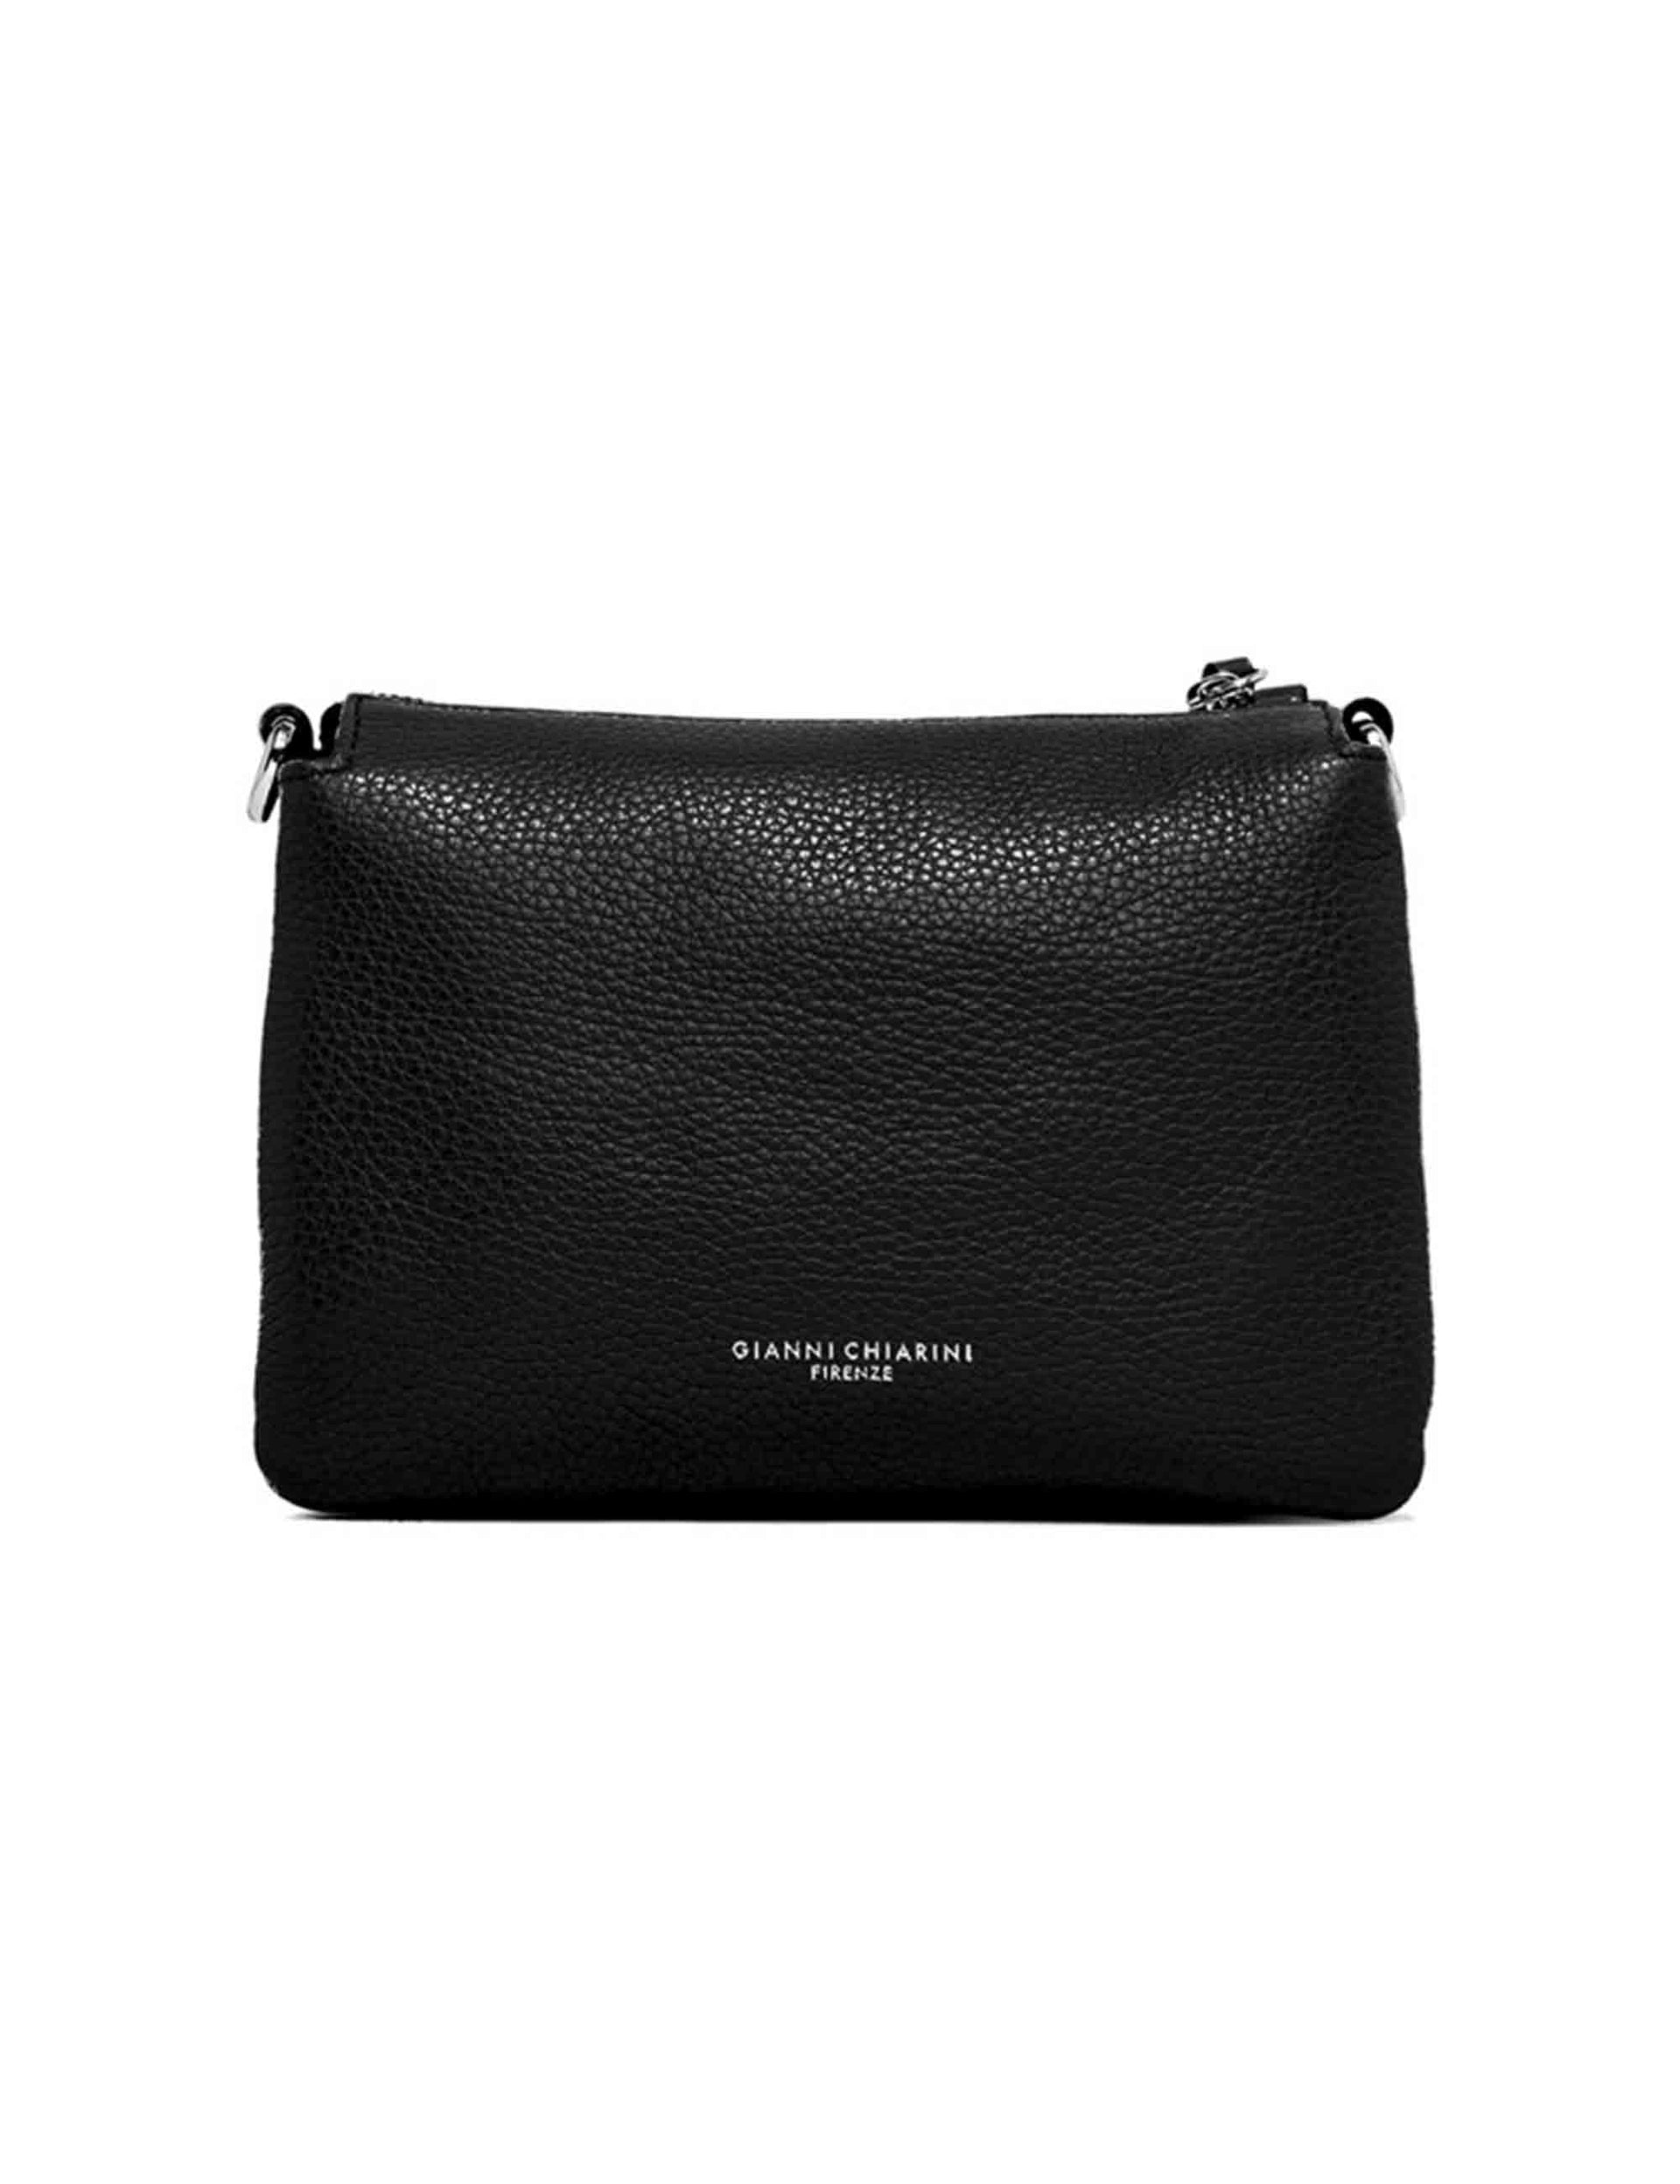 Three women's clutch bags in black leather with matching removable shoulder strap